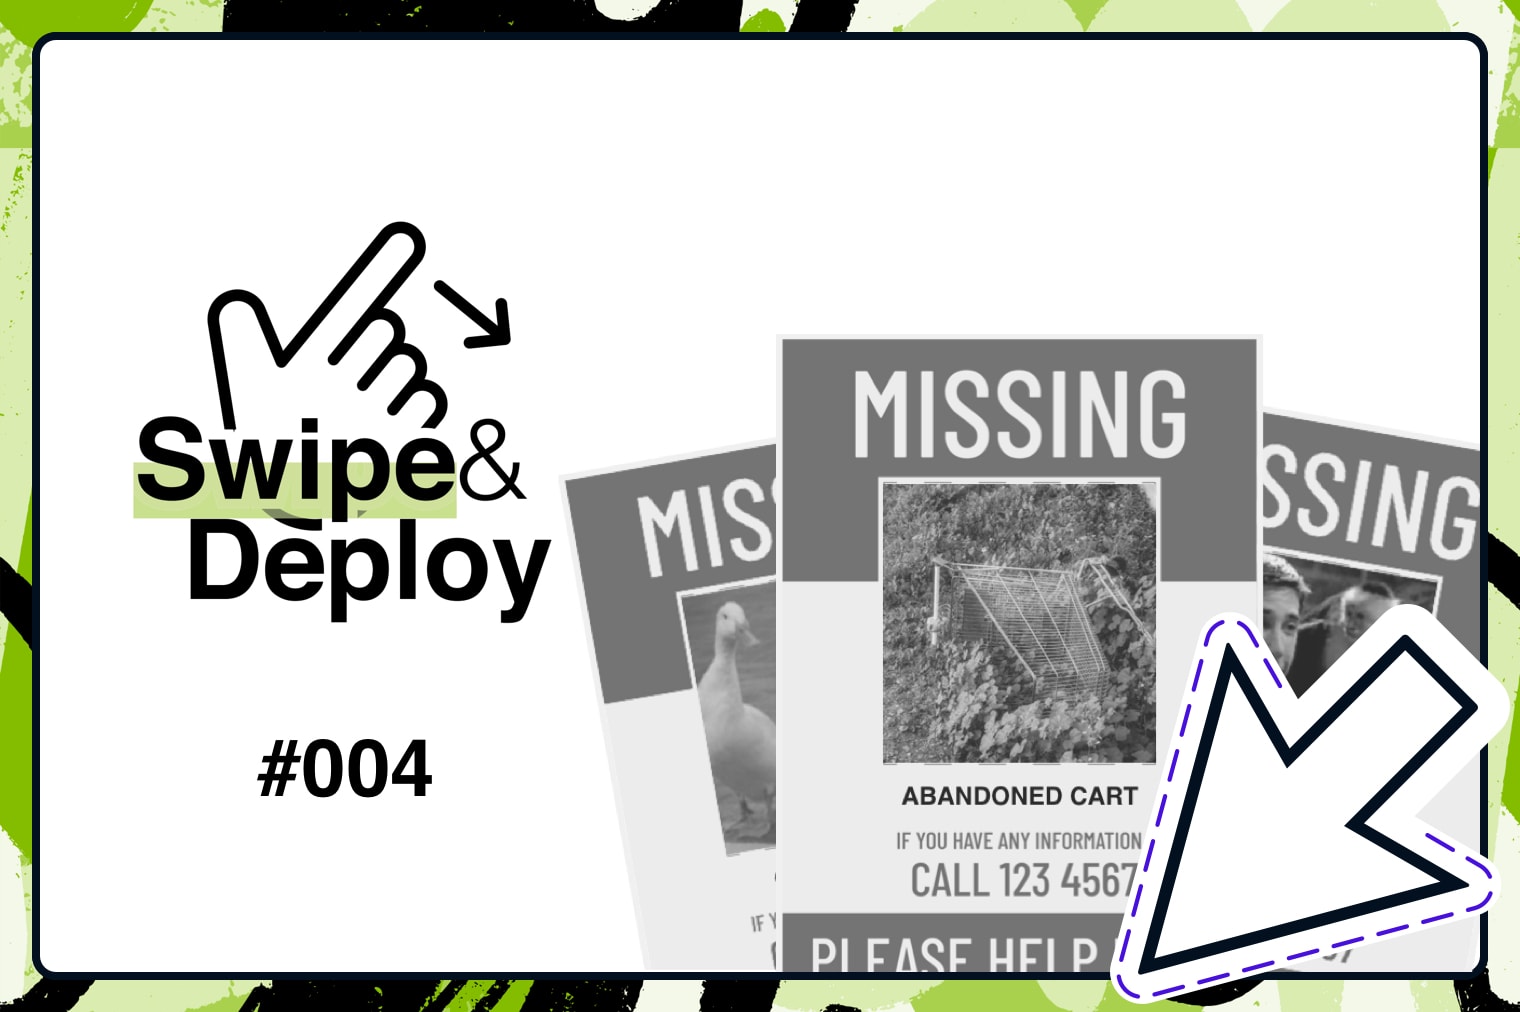 Swipe & Deploy 4 blog hero image of trolley on a missing poster.